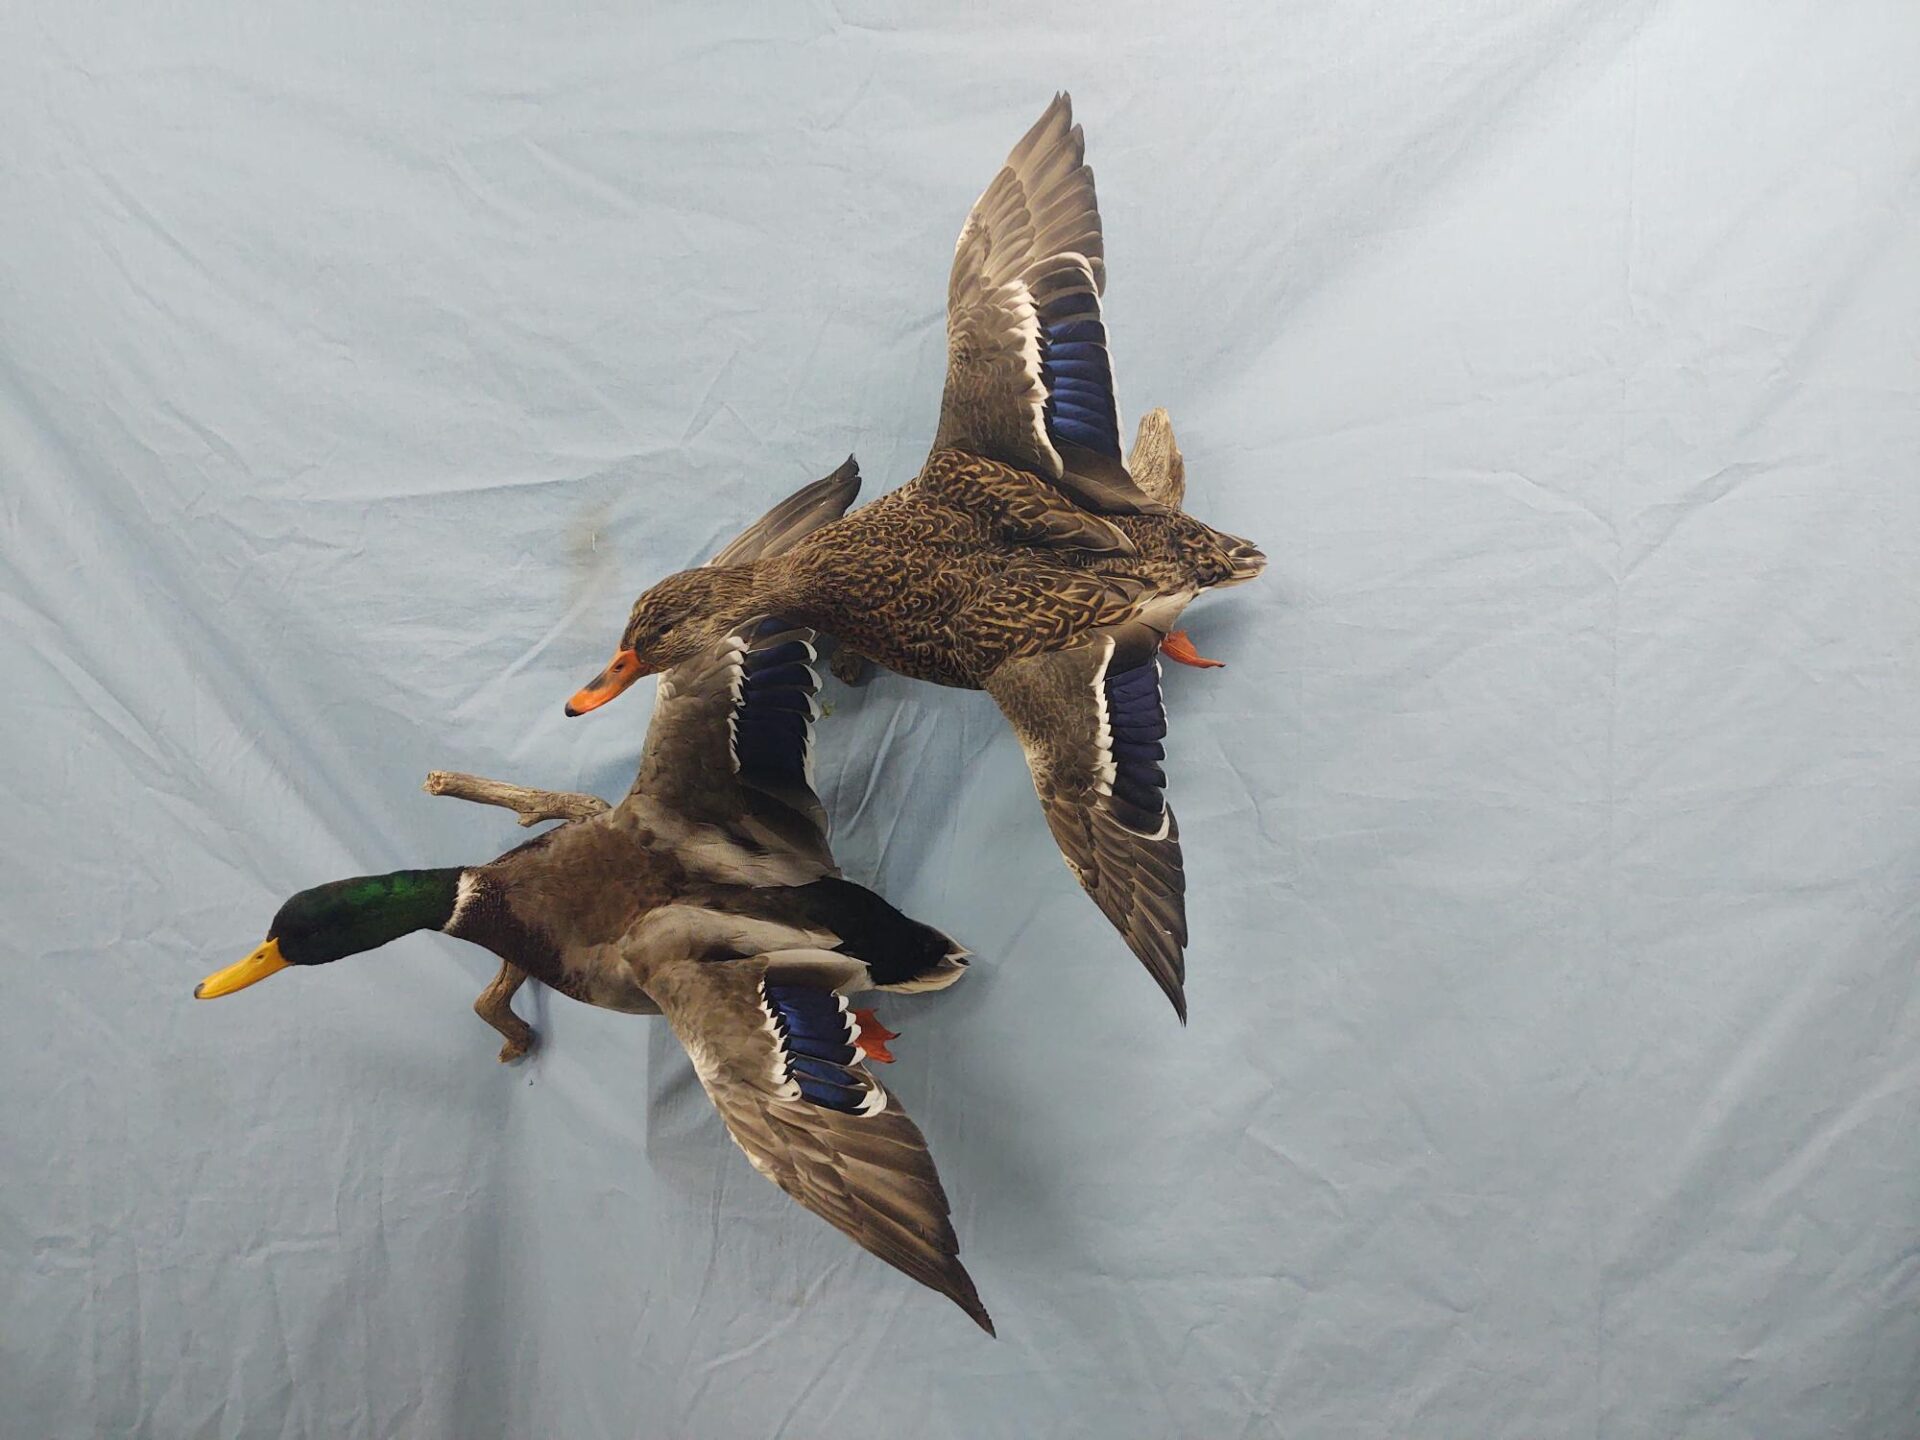 Two flying waterfowl taxidermy is on display